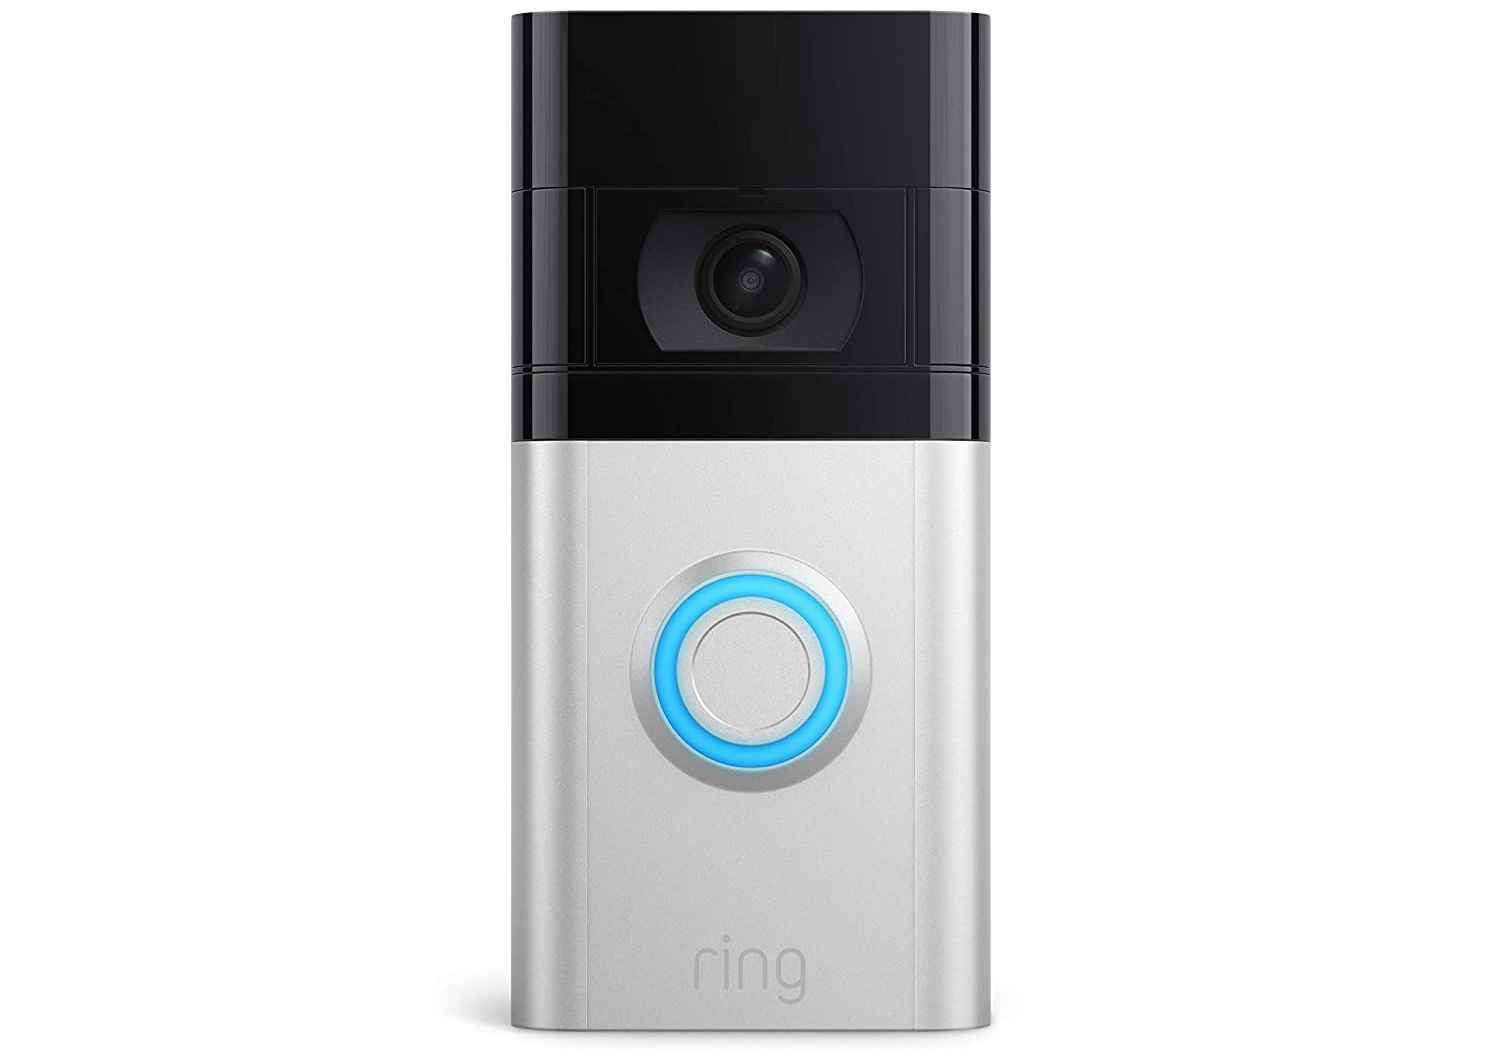 The NetDigz Editors rate the Ring Video Doorbell 4 as the 2nd Best Video Doorbell.